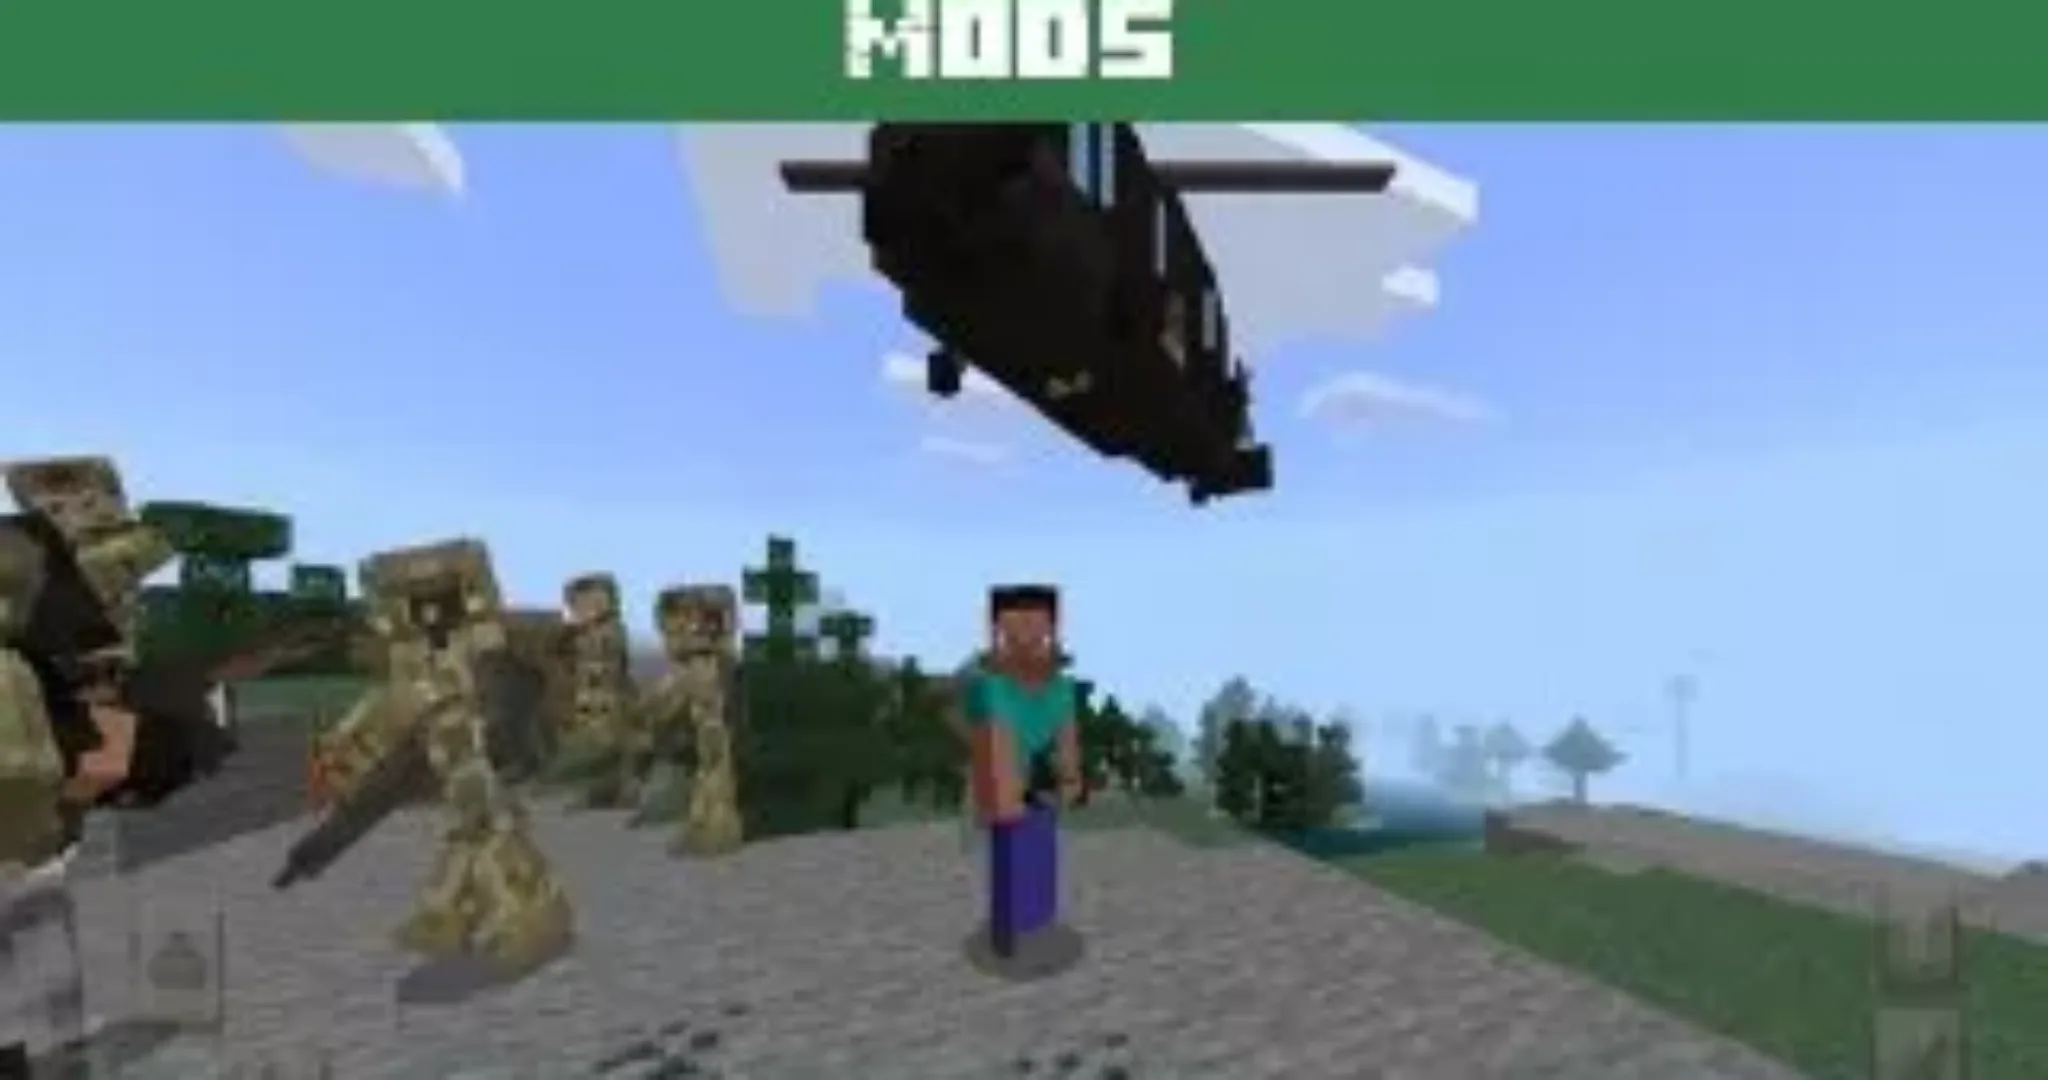 Call of Duty Mod for Minecraft PE